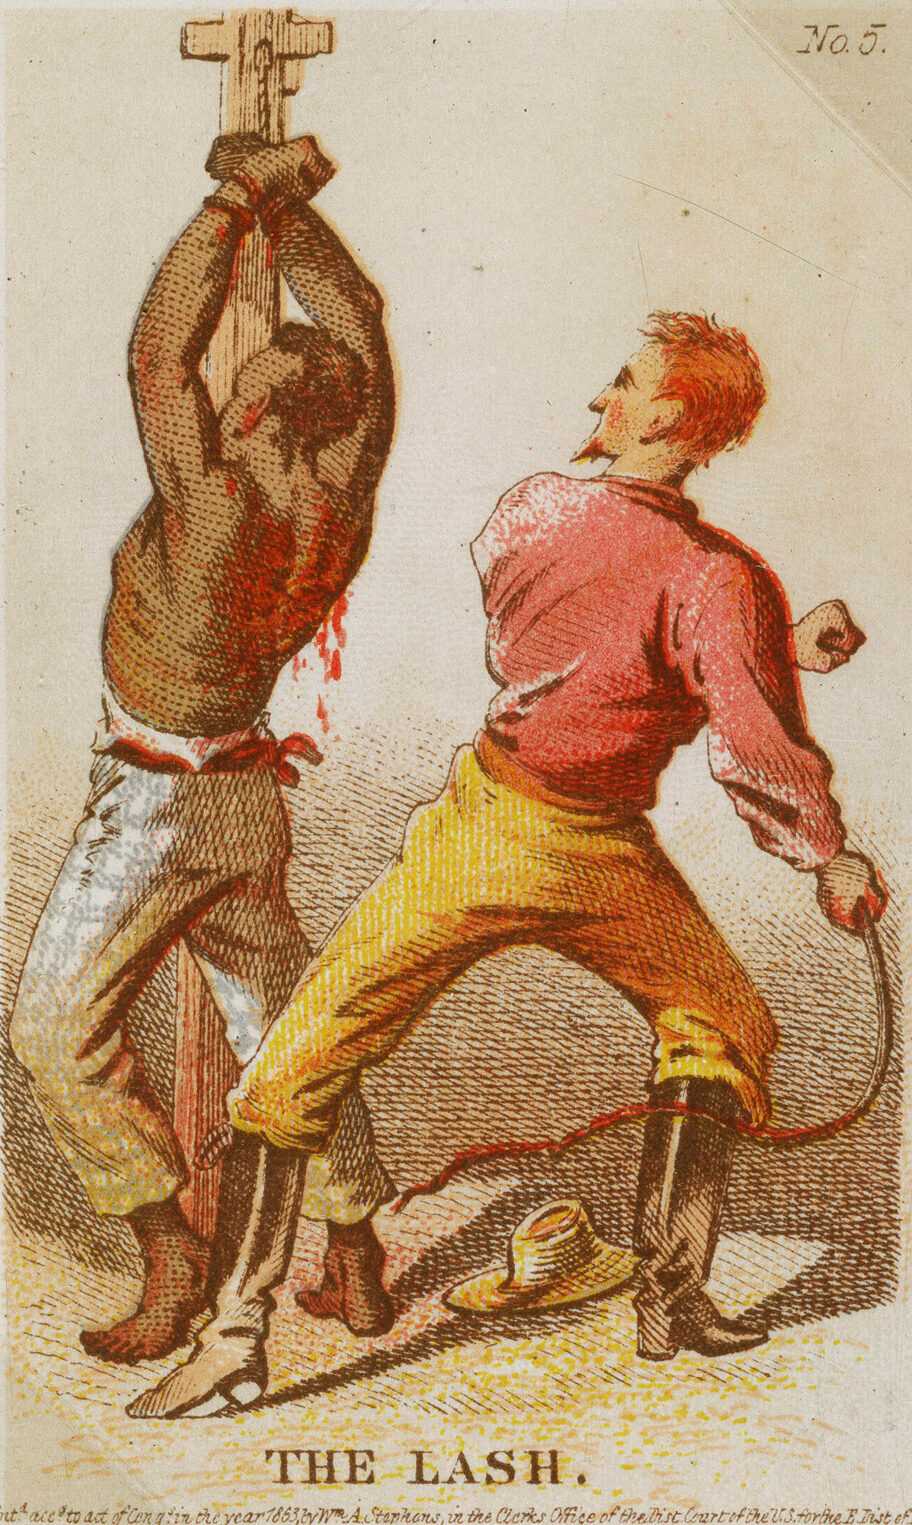 Illustration of black man being whipped